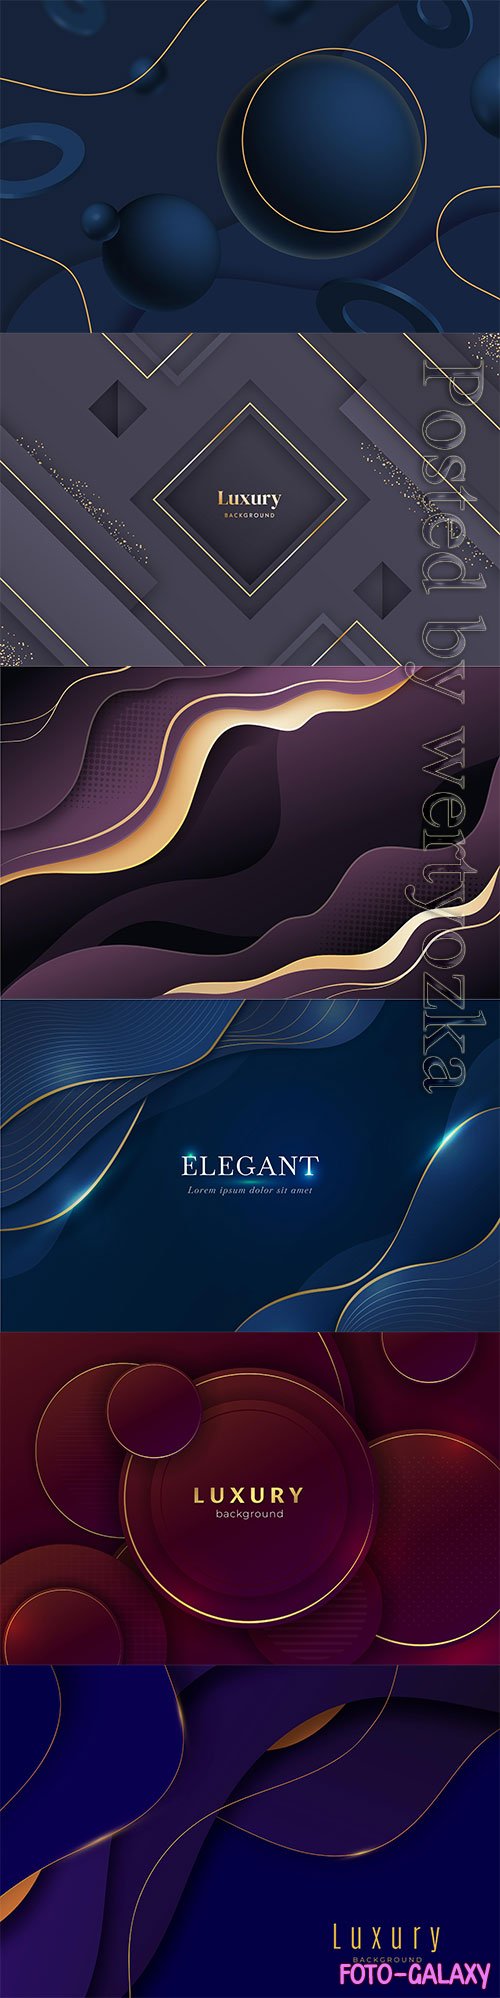 Luxury dark backgrounds with various abstract elements